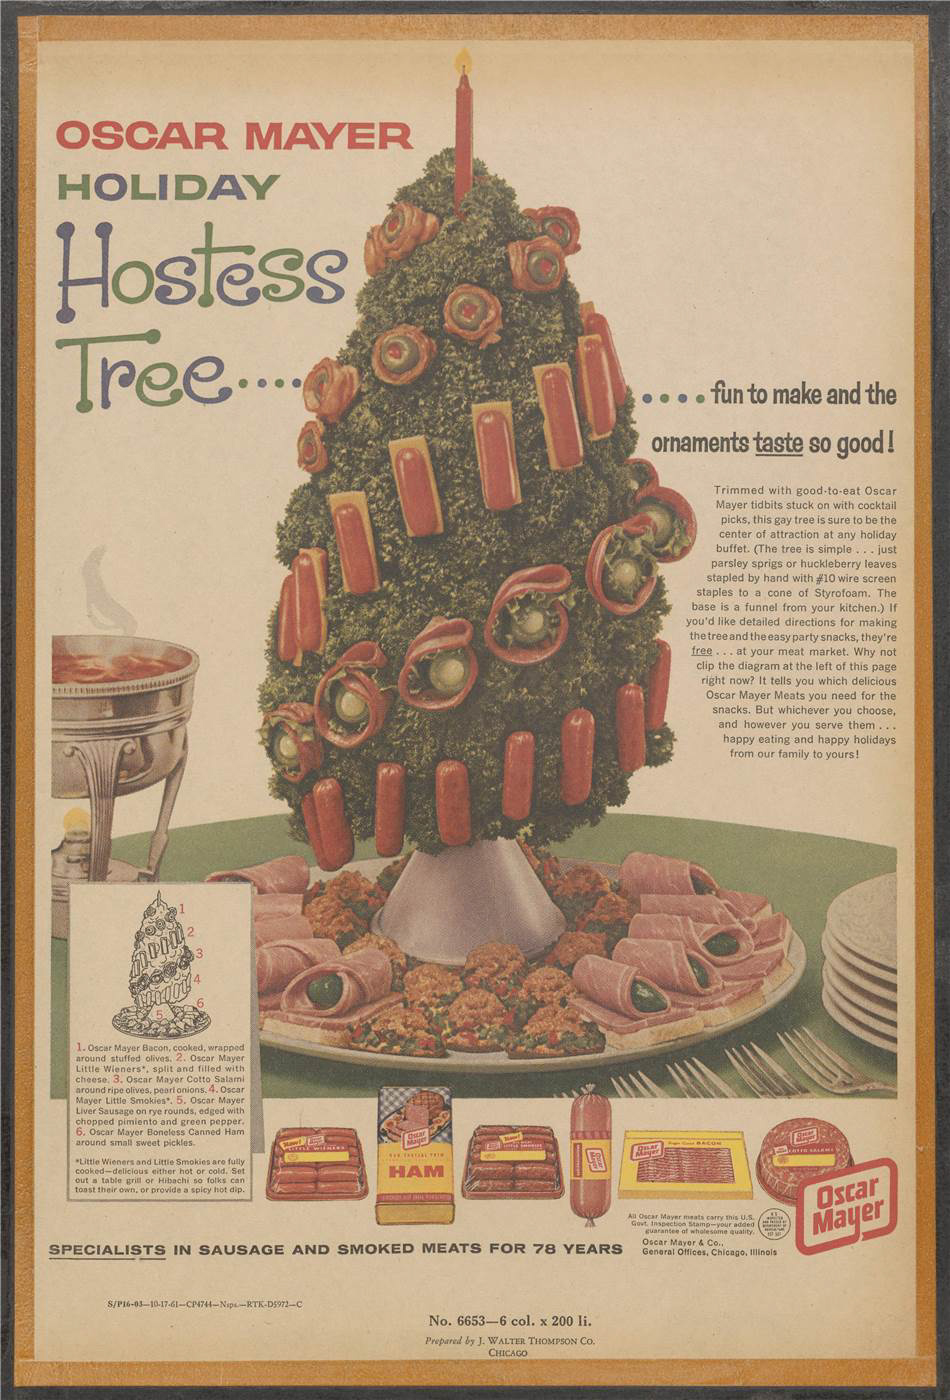 "Oscar Mayer Holiday Hostess Tree." Artwork of "tree" on a table constructed from parsley and decorated with Oscar Mayer products. Labelled diagram identifies the products. Text states that this tree is sure to be the centre of attention, and offers free directions for constructing this festive edifice.